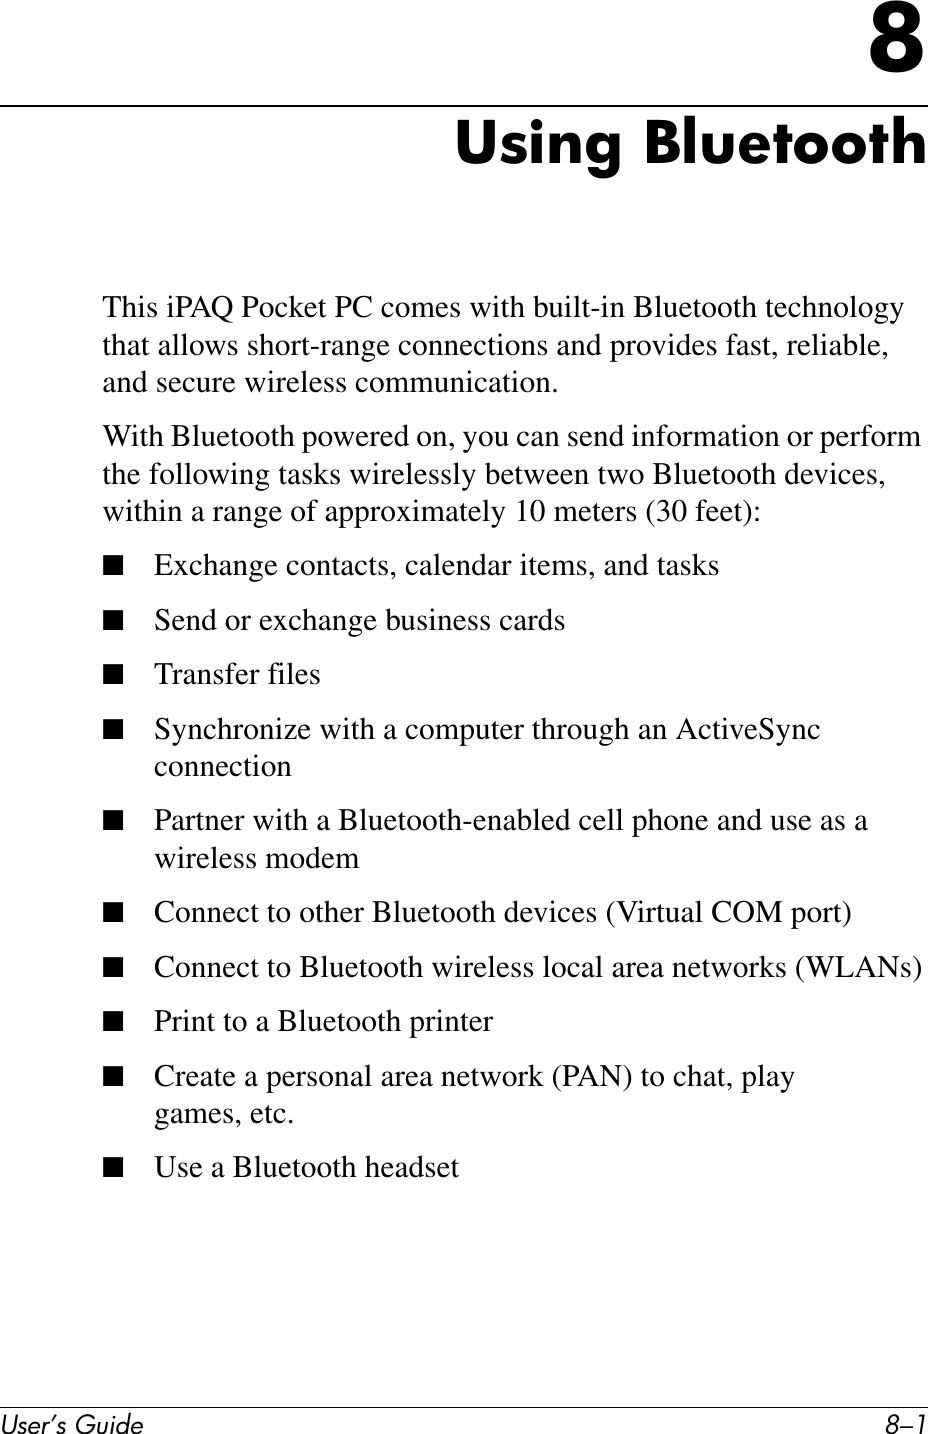 User’s Guide 8–18Using BluetoothThis iPAQ Pocket PC comes with built-in Bluetooth technology that allows short-range connections and provides fast, reliable, and secure wireless communication.With Bluetooth powered on, you can send information or perform the following tasks wirelessly between two Bluetooth devices, within a range of approximately 10 meters (30 feet):■Exchange contacts, calendar items, and tasks■Send or exchange business cards■Transfer files■Synchronize with a computer through an ActiveSync connection■Partner with a Bluetooth-enabled cell phone and use as a wireless modem■Connect to other Bluetooth devices (Virtual COM port)■Connect to Bluetooth wireless local area networks (WLANs)■Print to a Bluetooth printer■Create a personal area network (PAN) to chat, play games, etc.■Use a Bluetooth headset